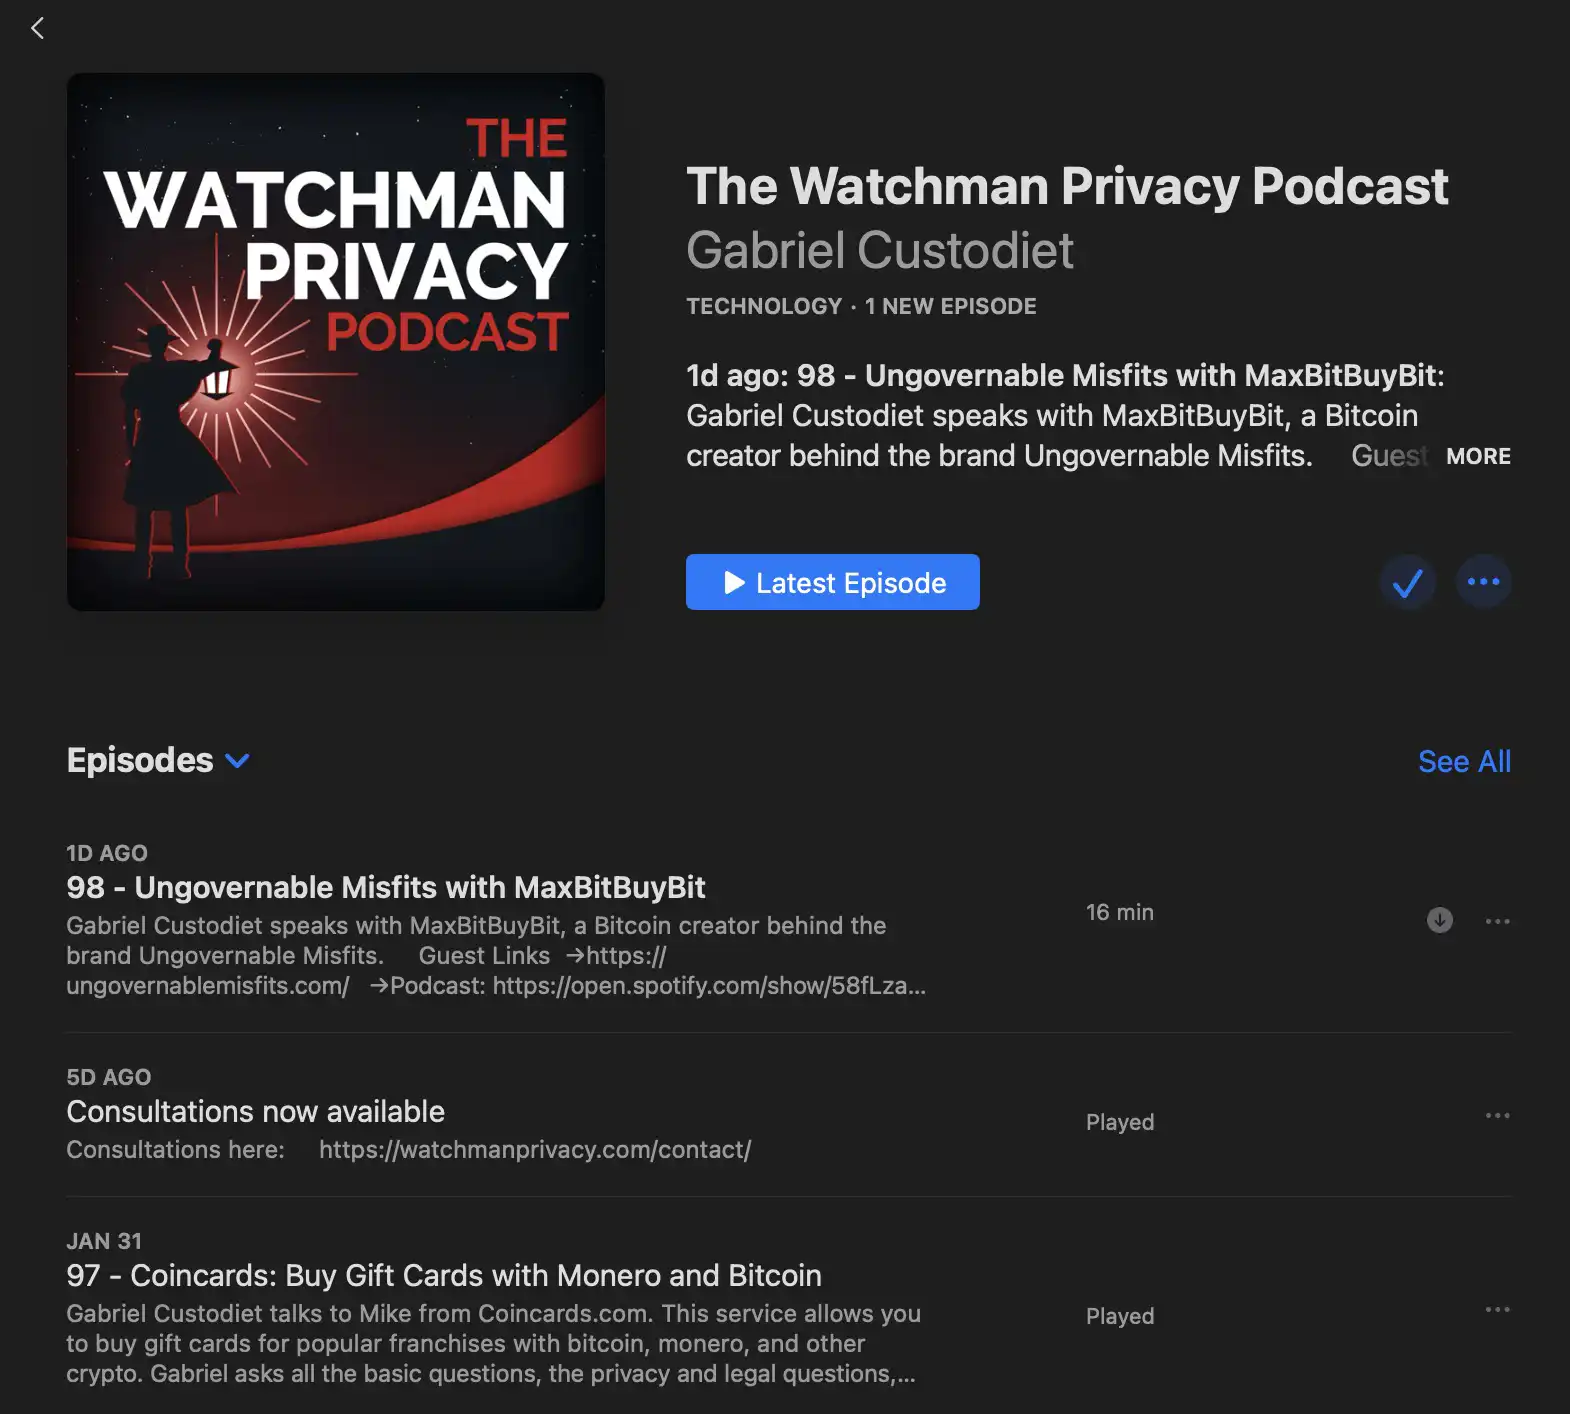 The Watchman Privacy Podcast by Gabriel Custodiet